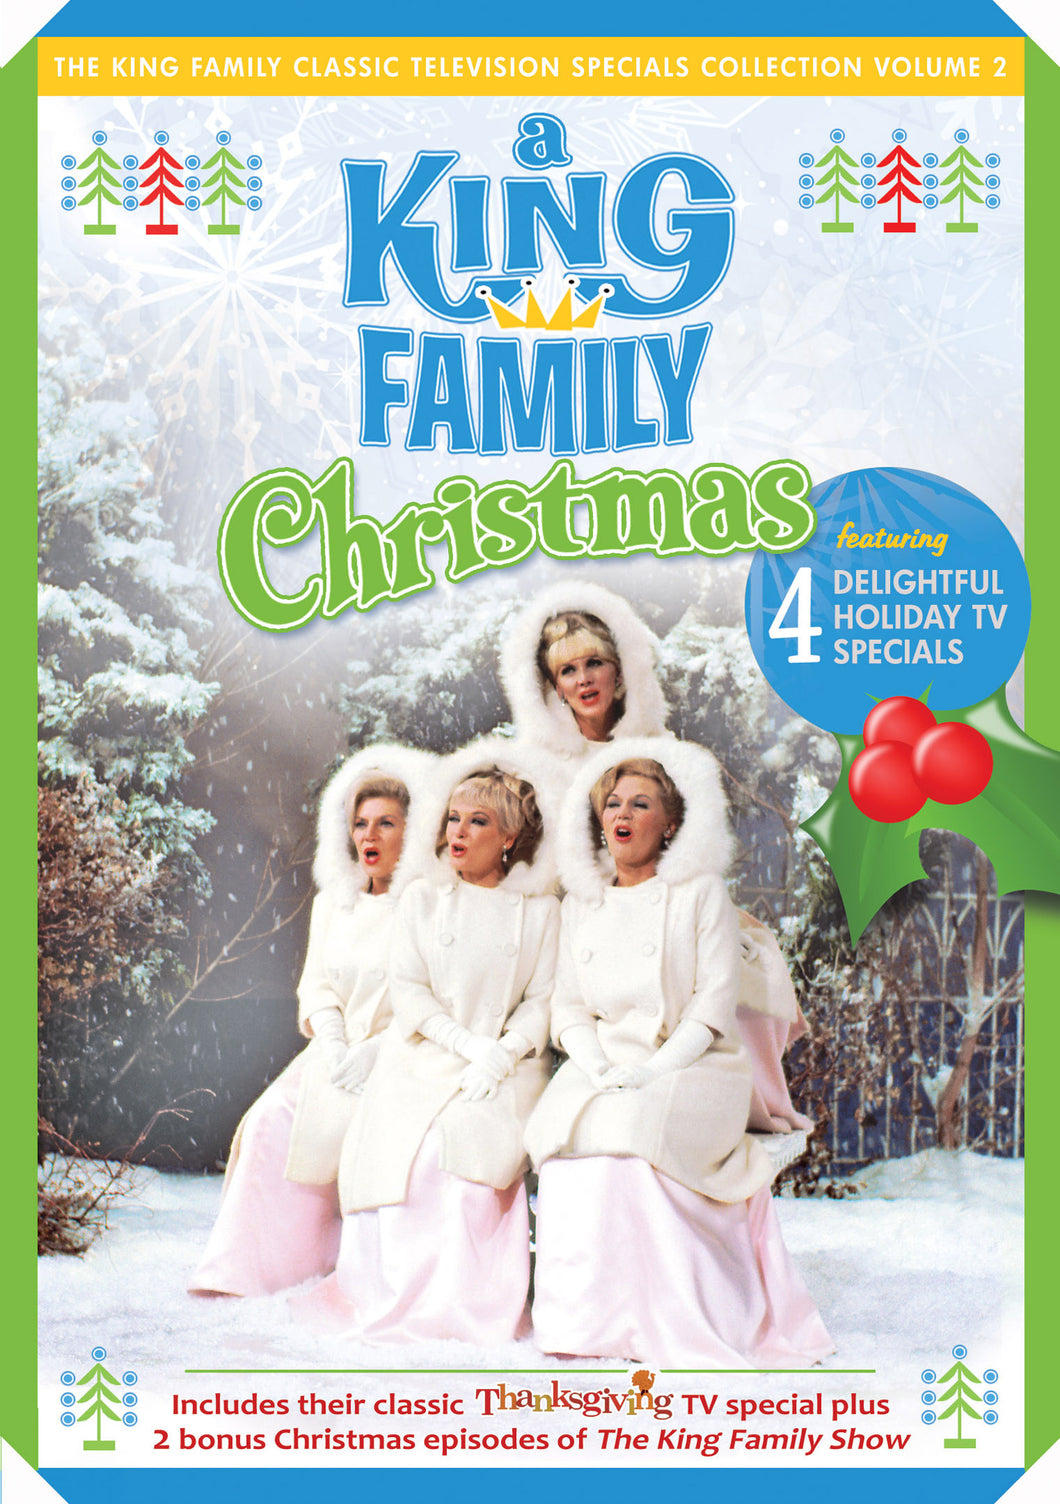 King Family King Family Christmas: Classic Television Specials Volume 2